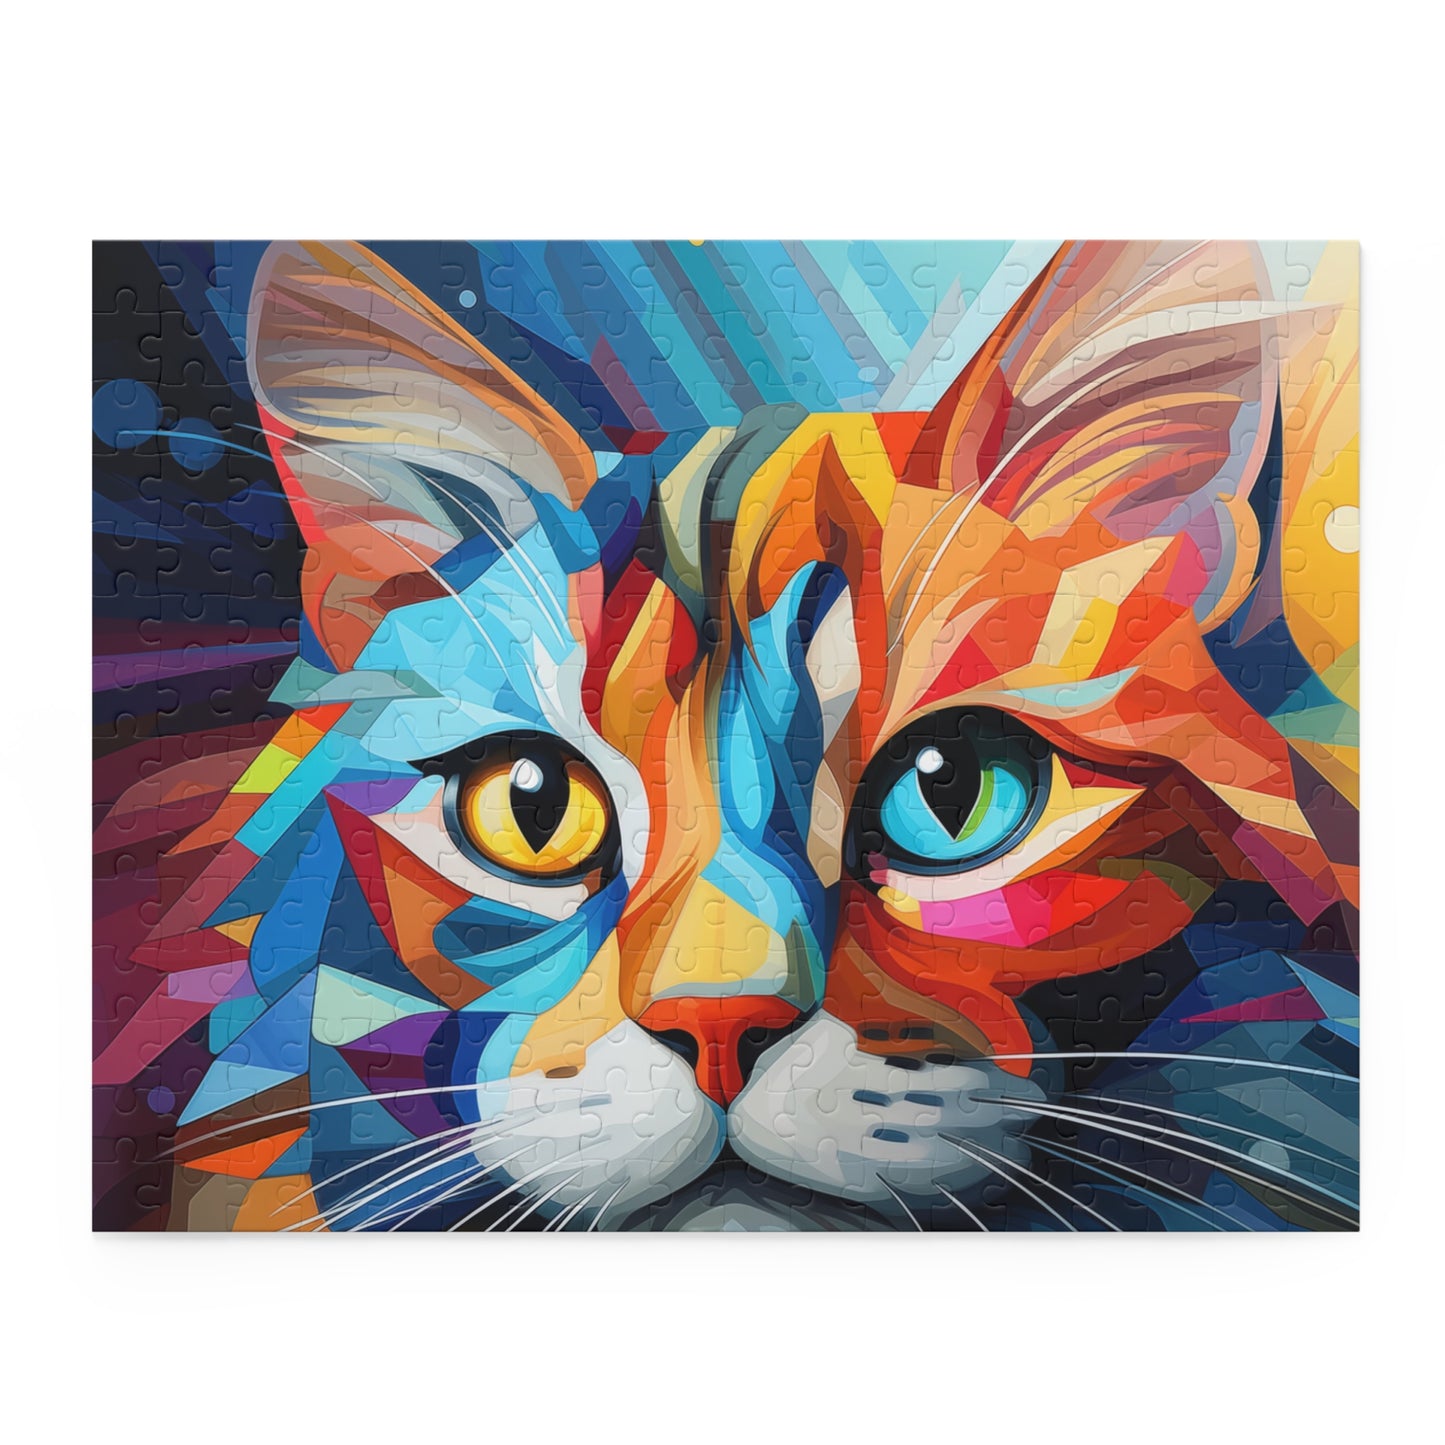 Abstract Oil Paint Colorful Cat Jigsaw Puzzle Adult Birthday Business Jigsaw Puzzle Gift for Him Funny Humorous Indoor Outdoor Game Gift For Her Online-3